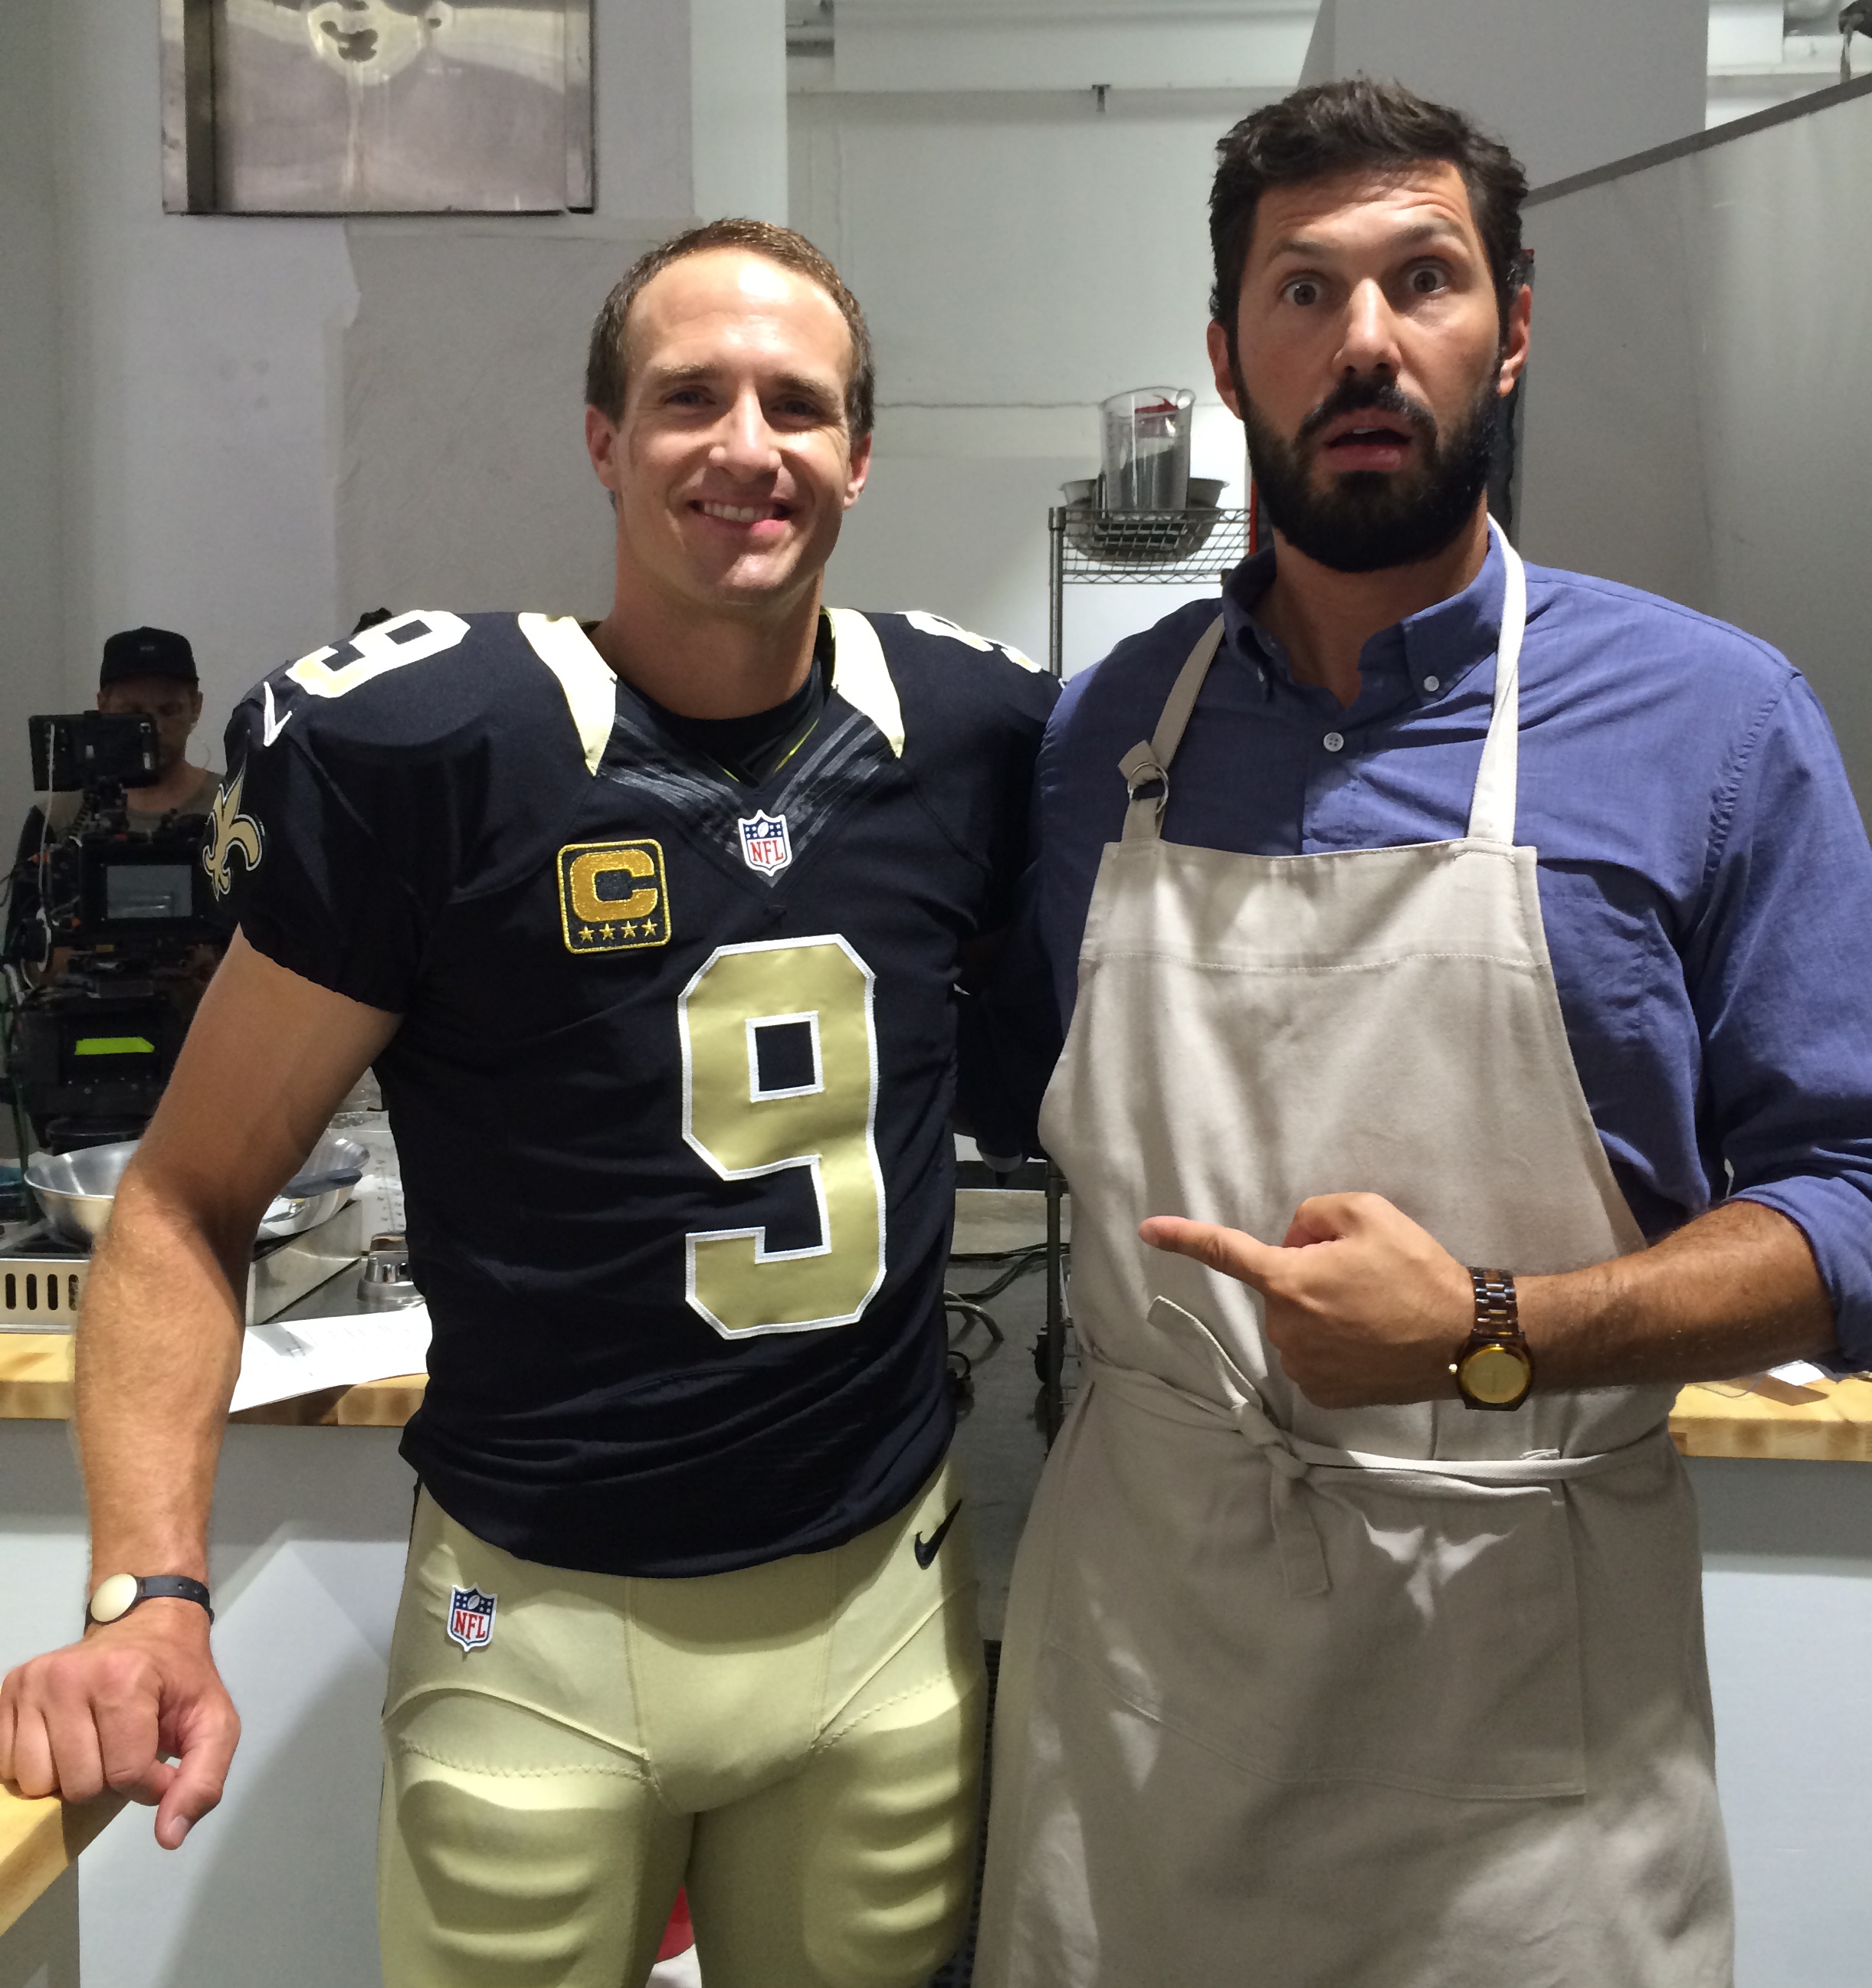 Brian Thomas Smith with Drew Brees in the hit commercial for Verizon.